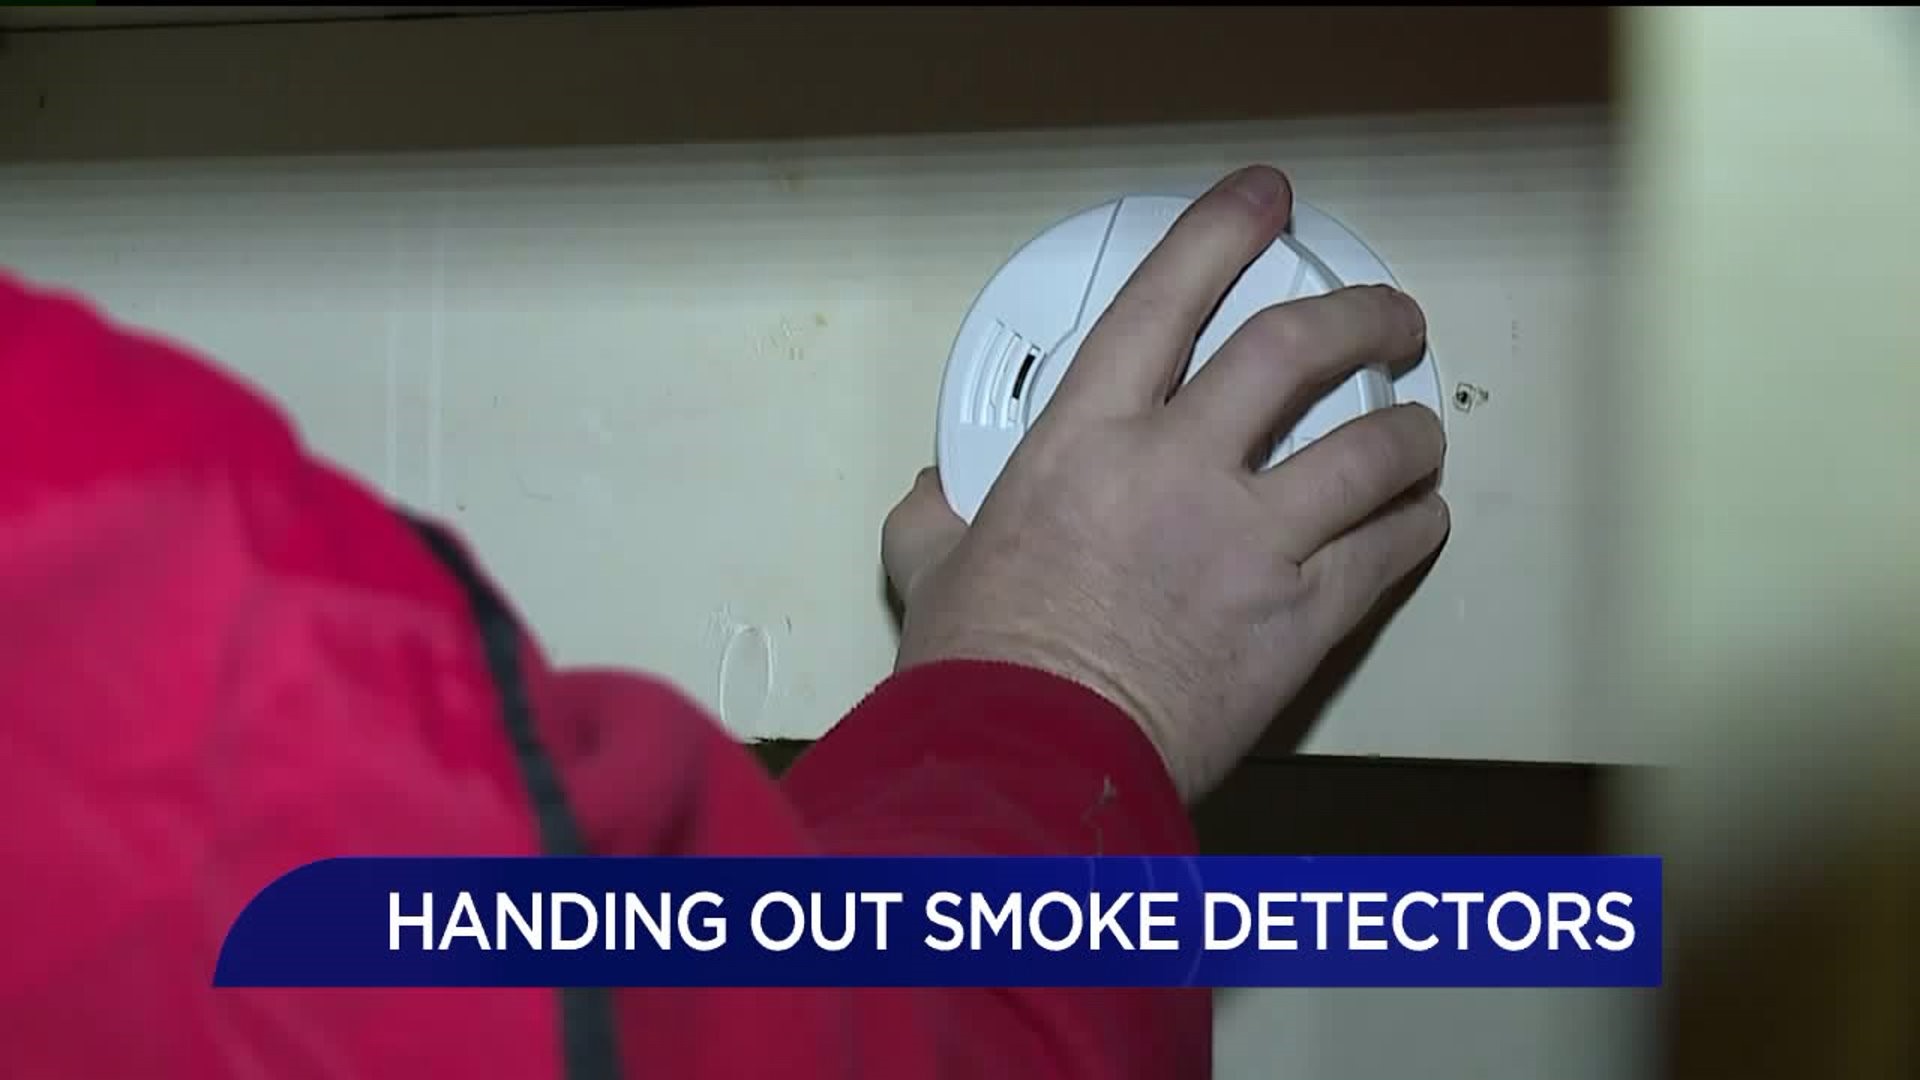 Williamsport Bureau of Fire and Red Cross Team Up to Hand Out Smoke Detectors